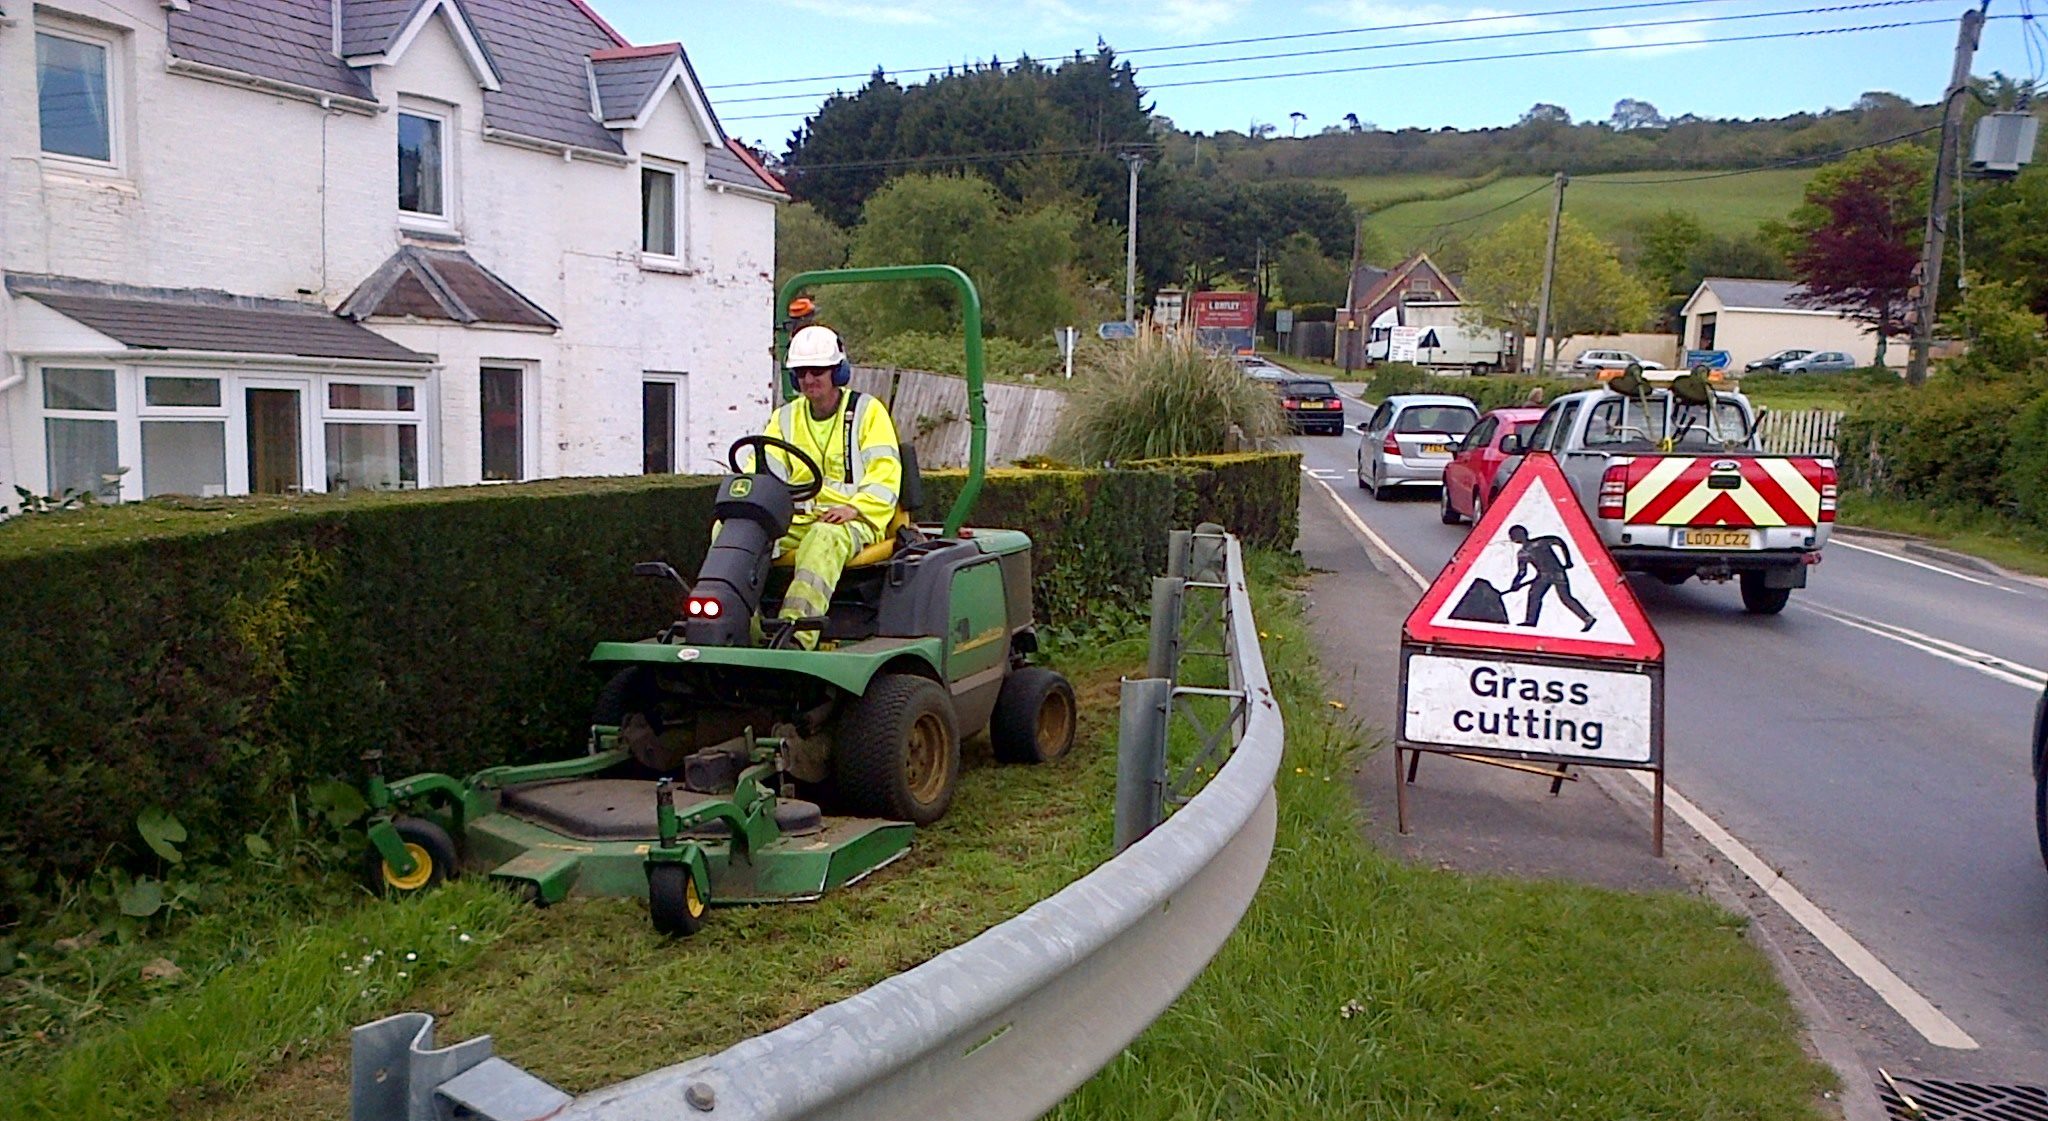 Photo showing grass being cut using a ride on mower along the verge